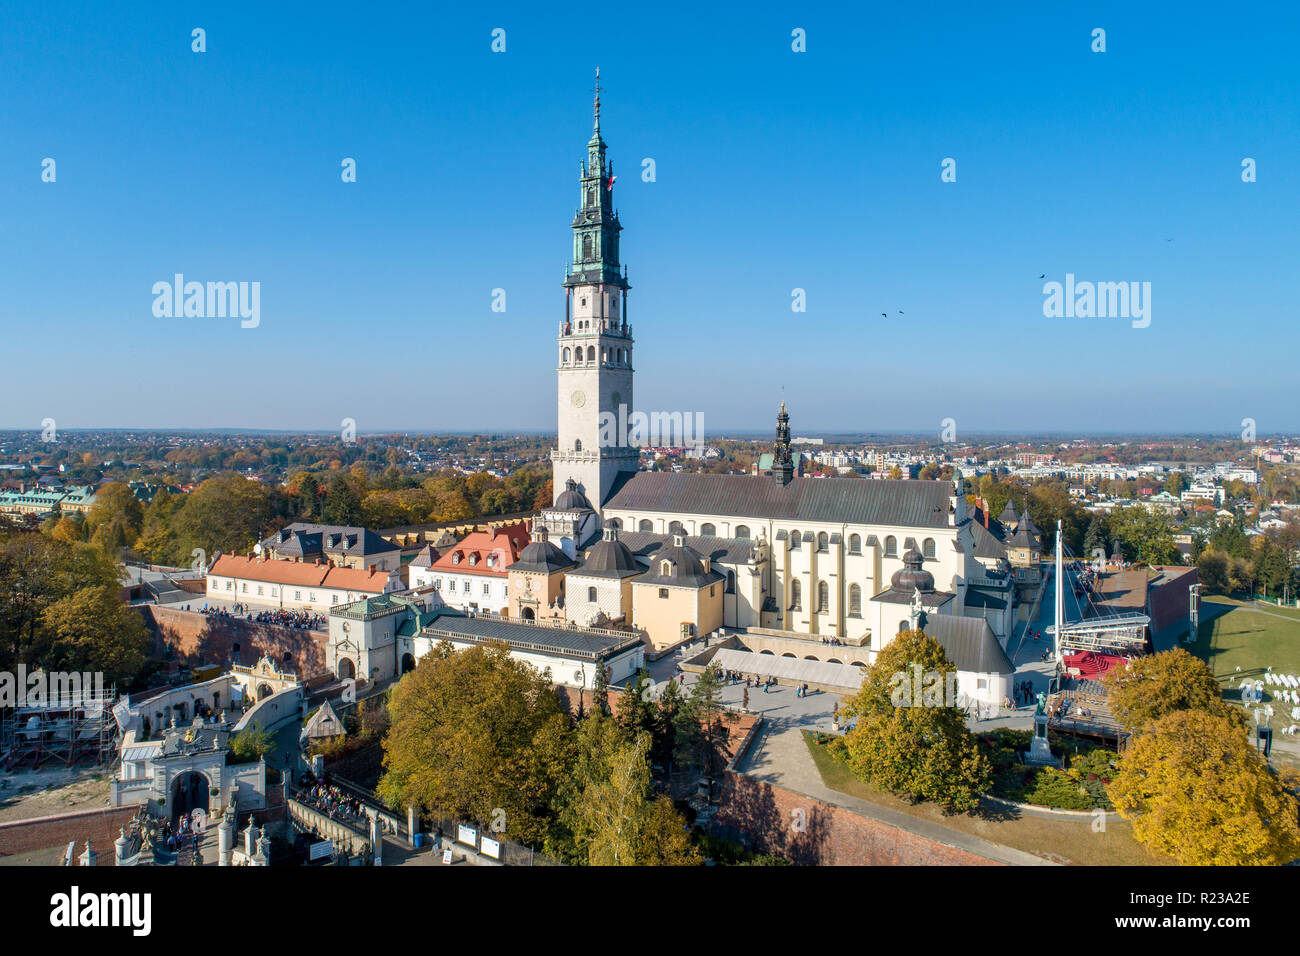 Poland, Częstochowa. Jasna Góra fortified monastery and church on the hill. Famous historic place and Polish Catholic pilgrimage site with Black Madon Stock Photo